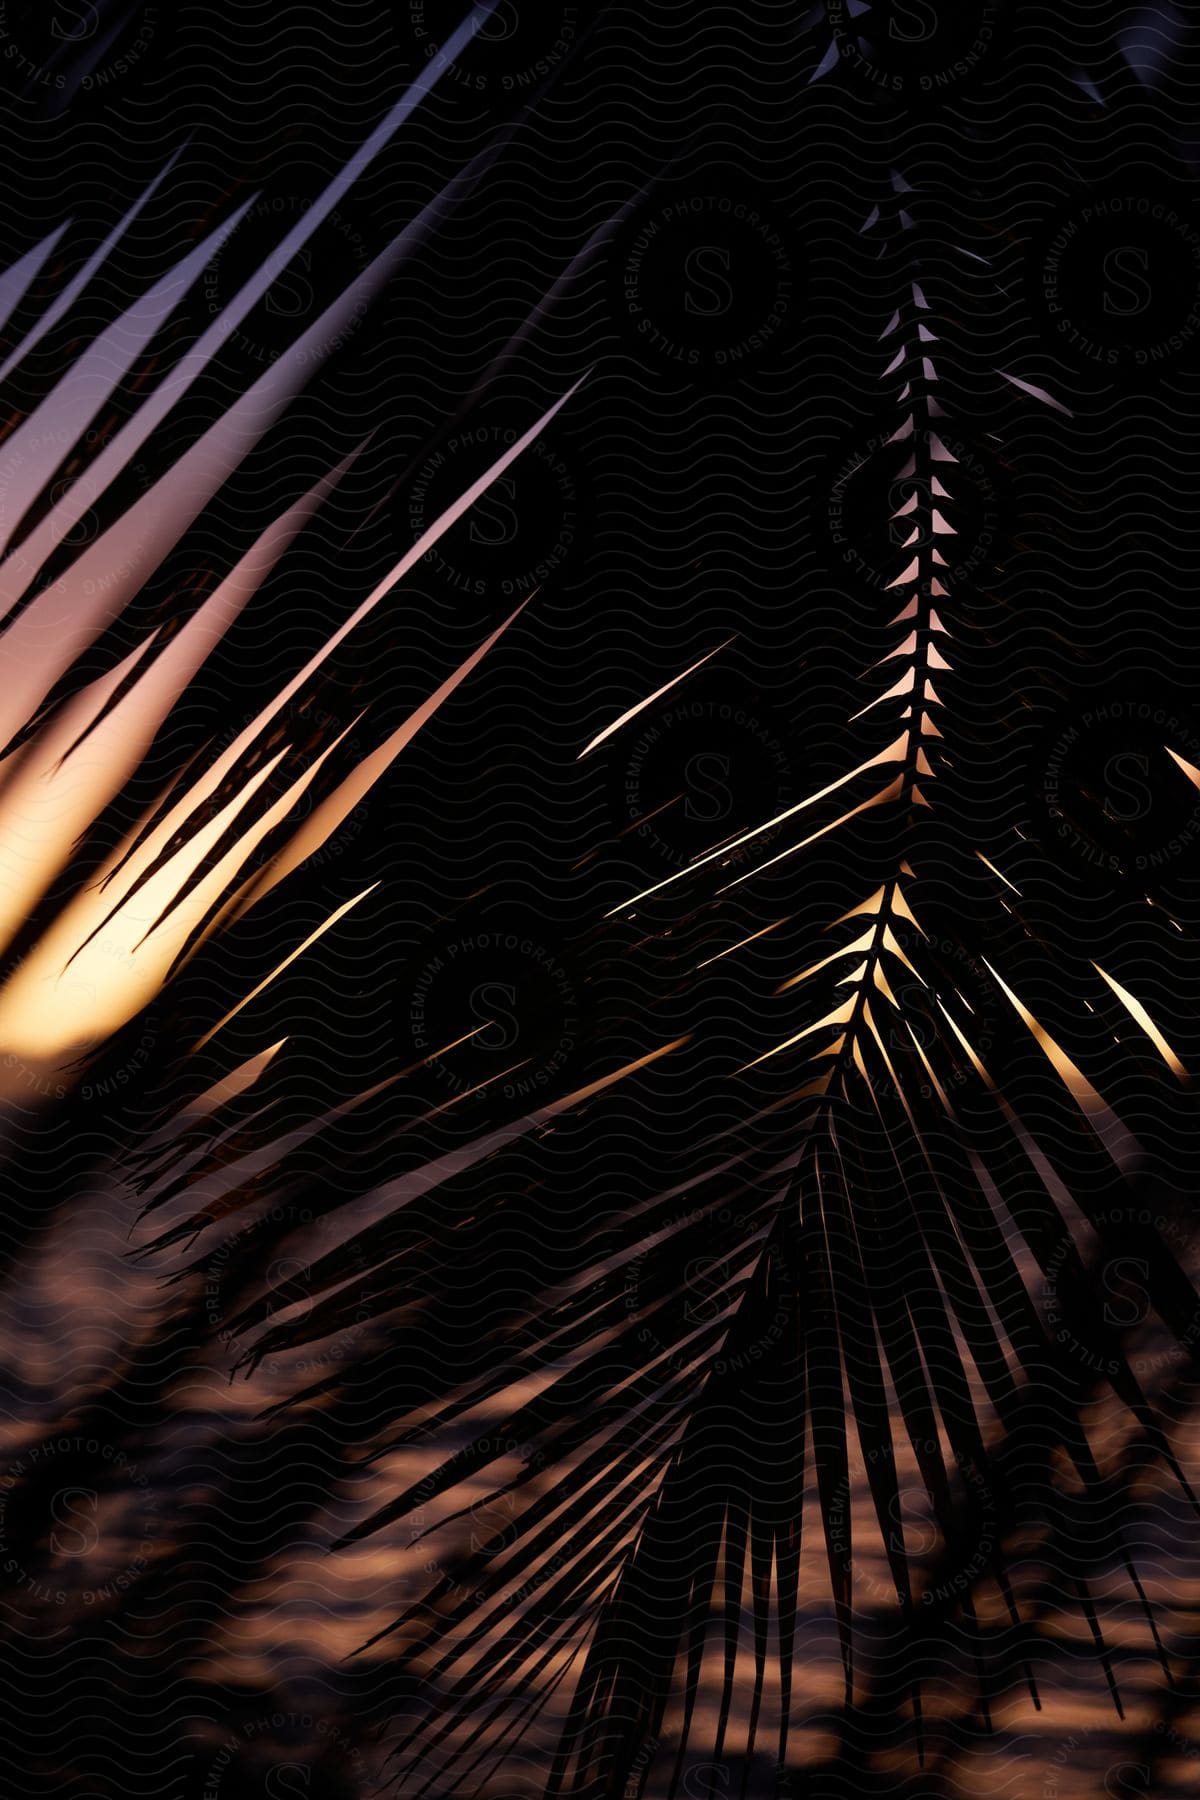 A silhouette of a palm tree leaf on a beach in front of a sunset